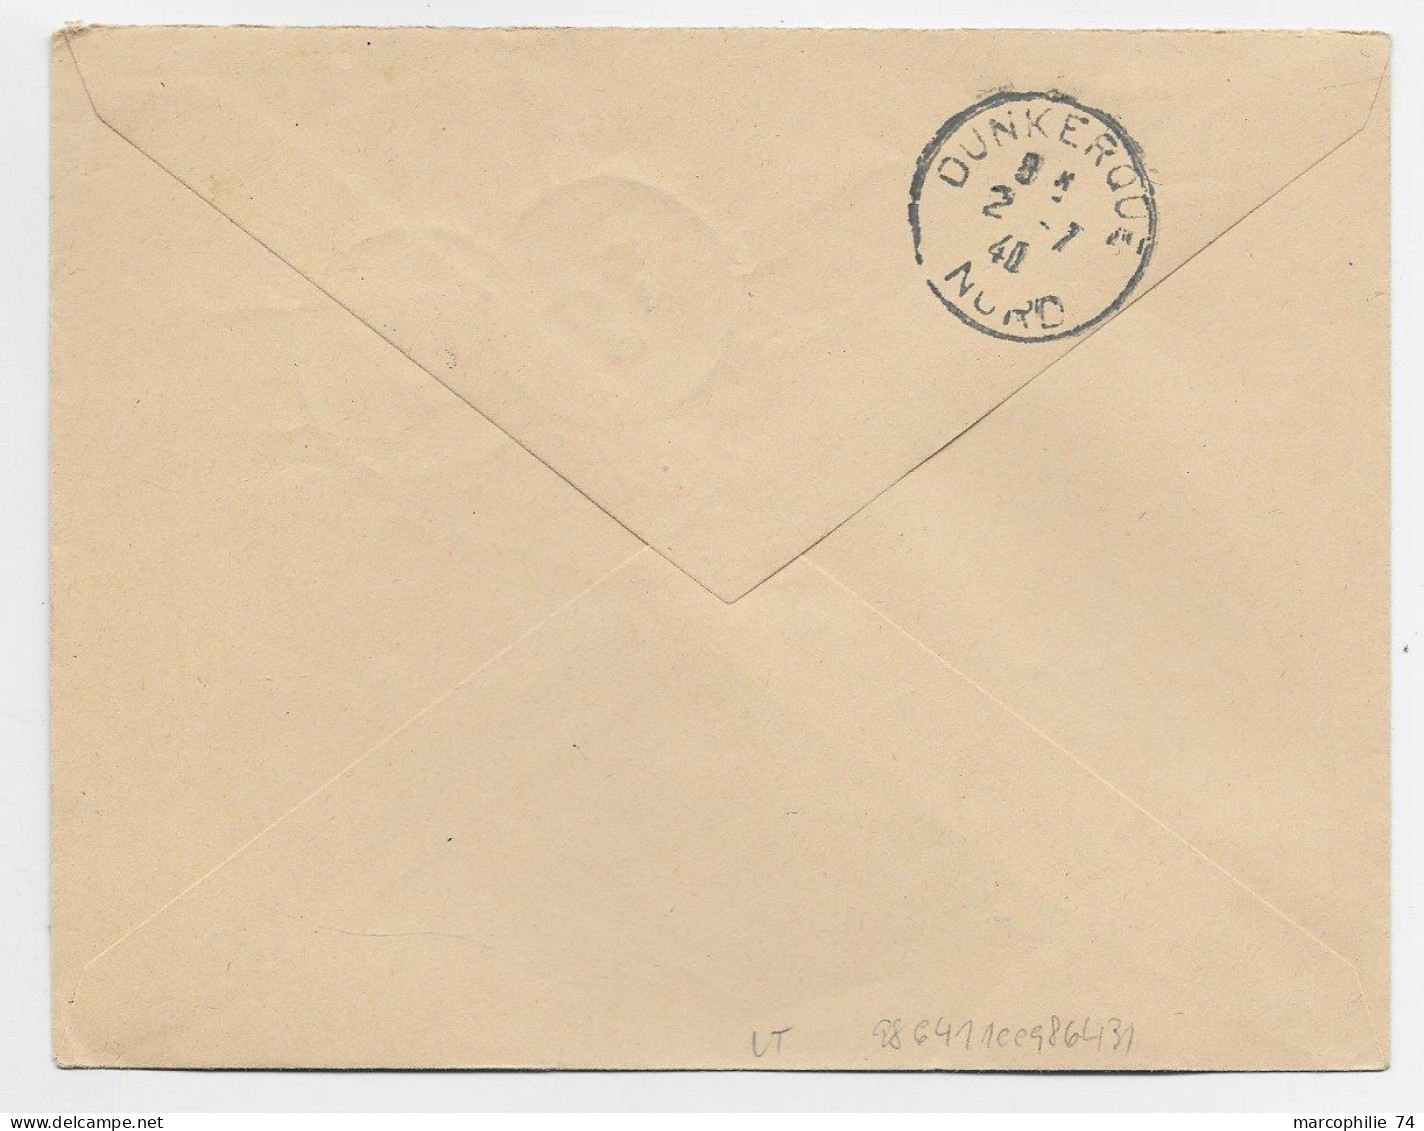 FRANCE MERCURE 50C PAIRE  LETTRE BRIEF BESETSTES NORD DUNKERQUE 1.7.1940 NORD POUR DUNKERQUE - War Stamps